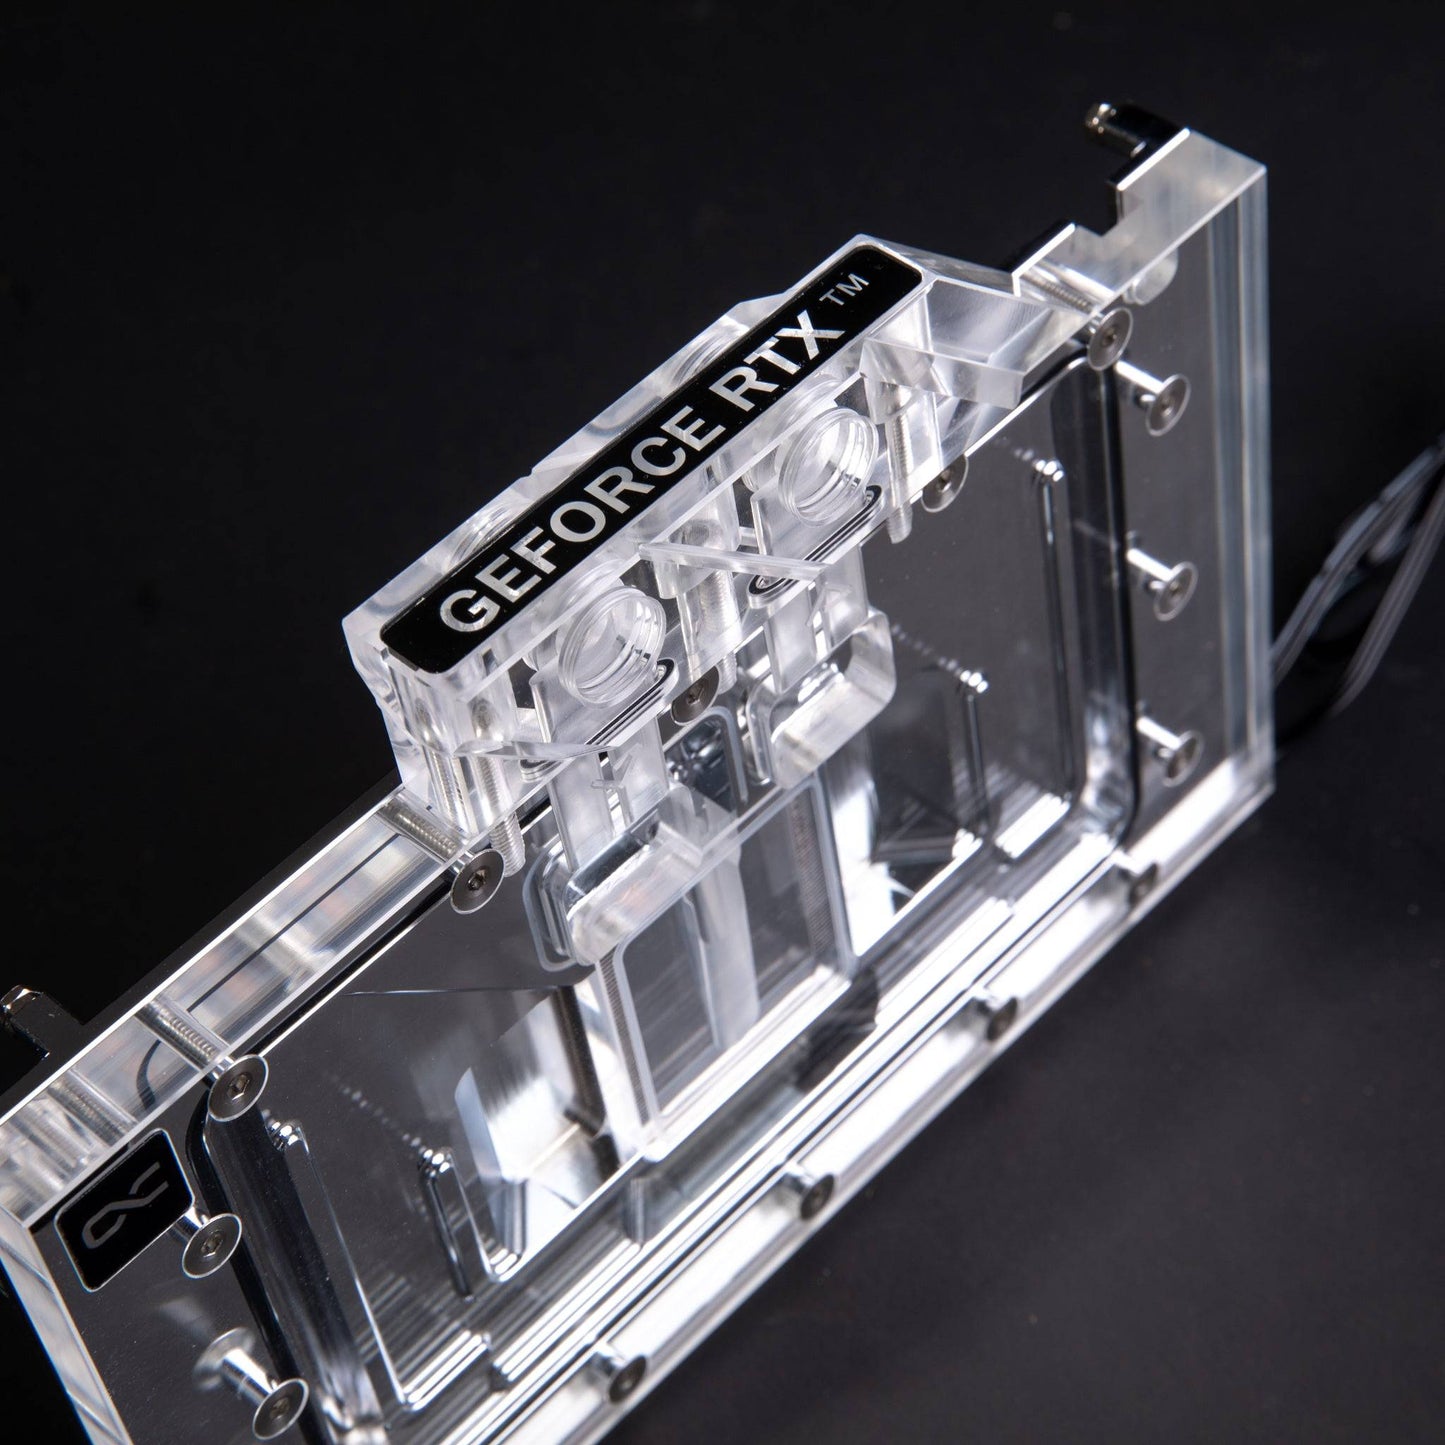 Alphacool Eisblock Aurora Acryl GPX-N RTX 4090 Reference (Inno3D, PNY, Galax) with Backplate GPU Water Block Ordinary Cooling Gear